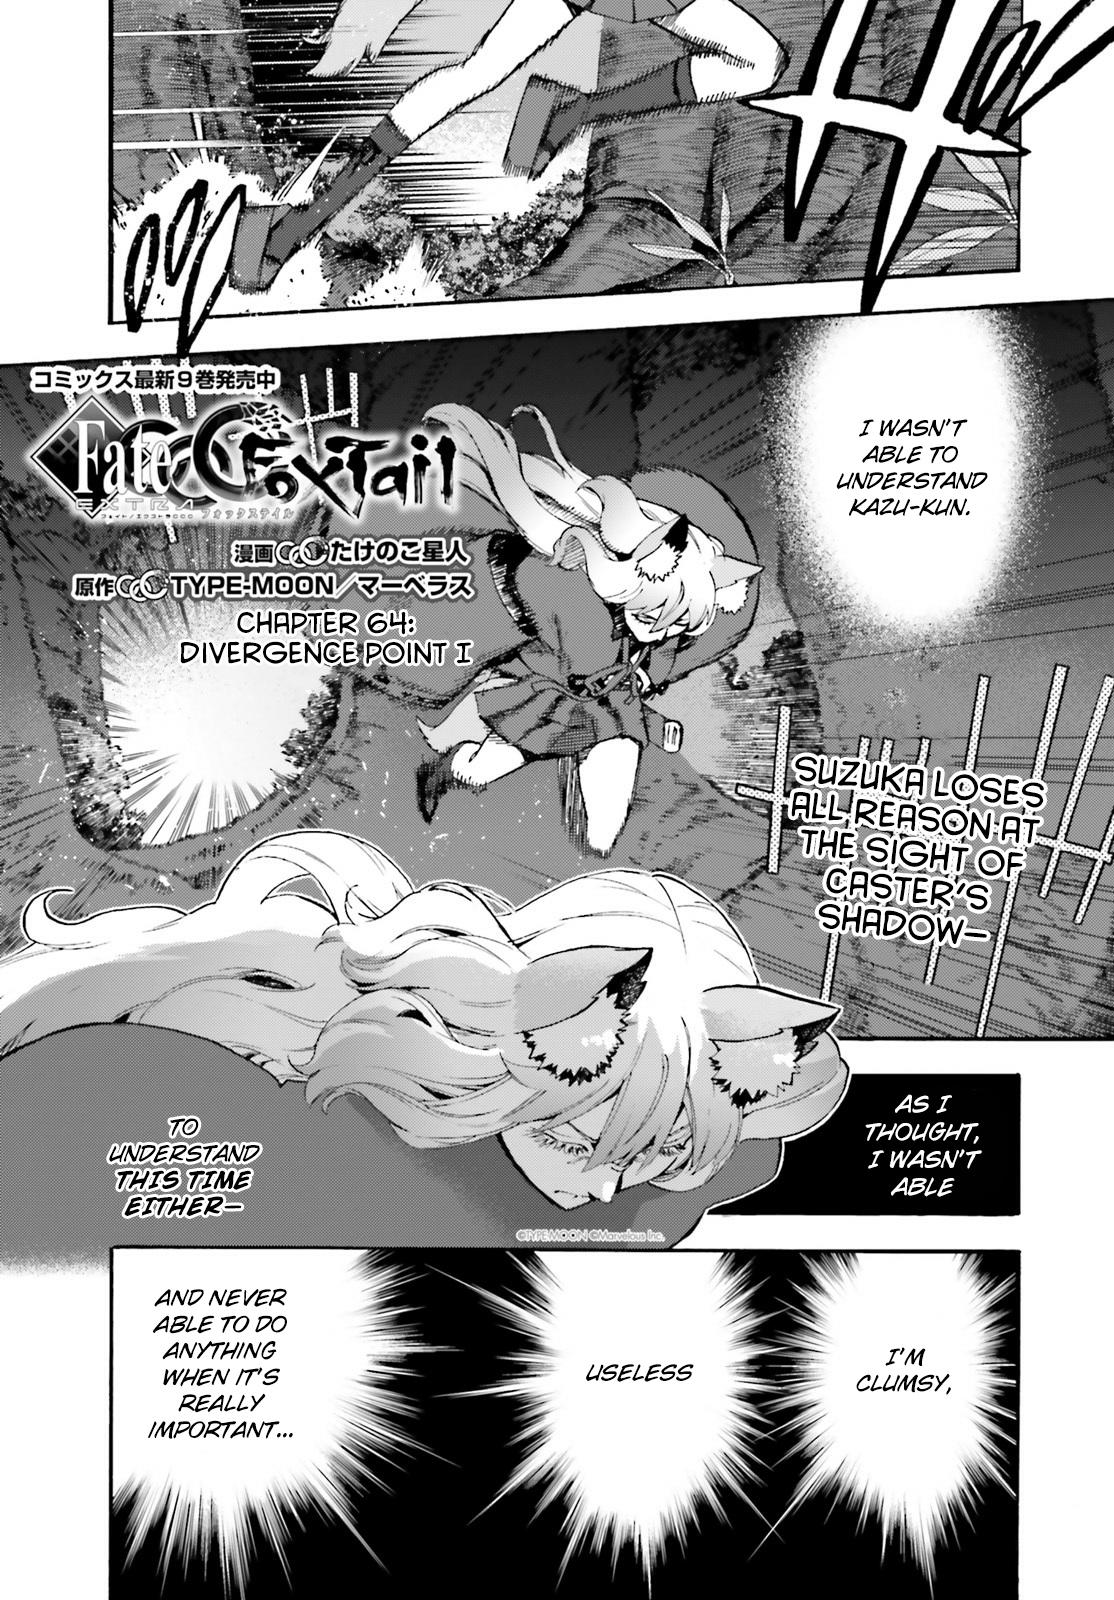 Read Fate Extra Ccc Foxtail Chapter 64 Divergence Point 1 On Mangakakalot